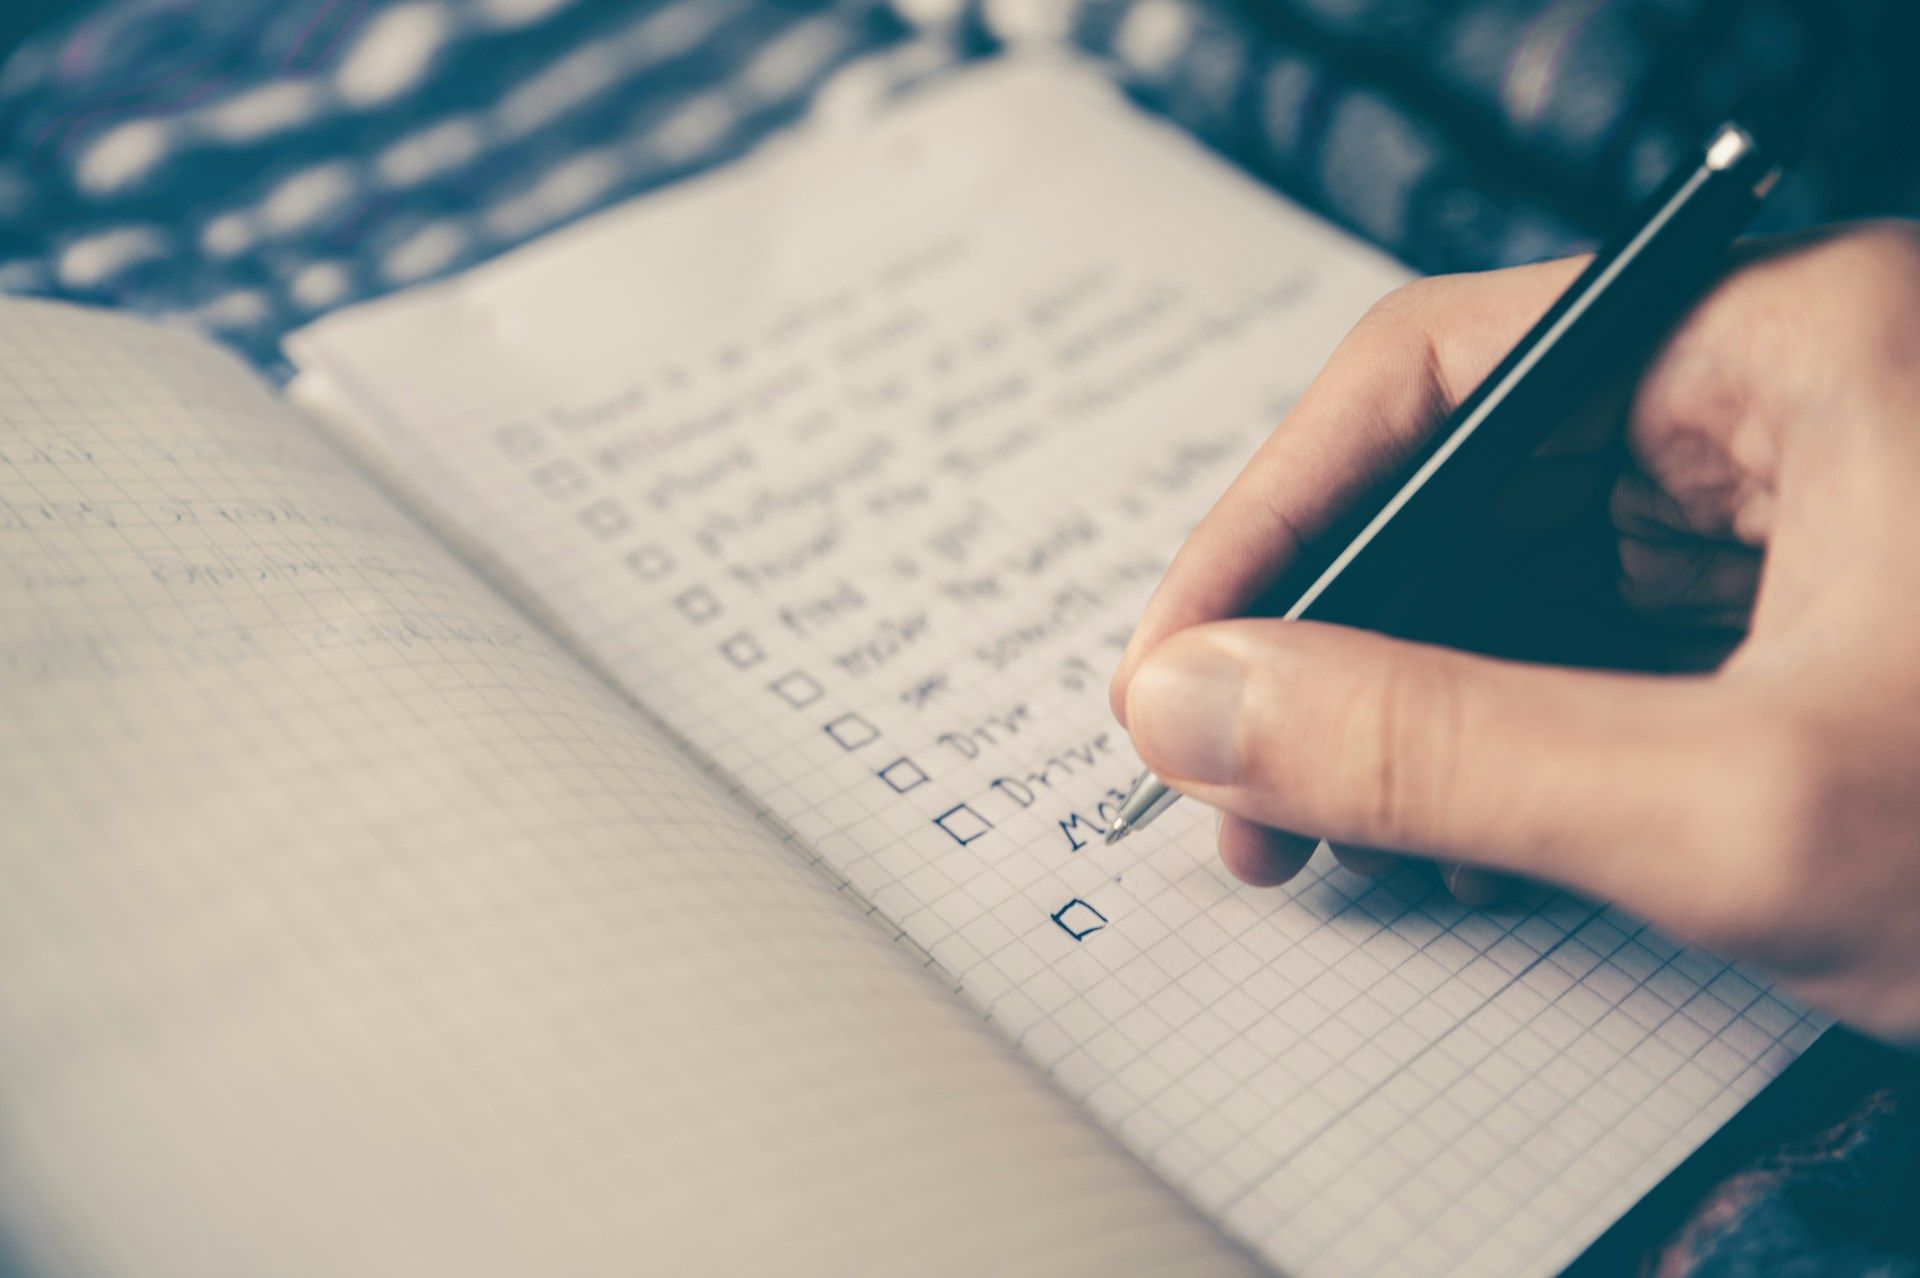 Creating a checklist on a notebook